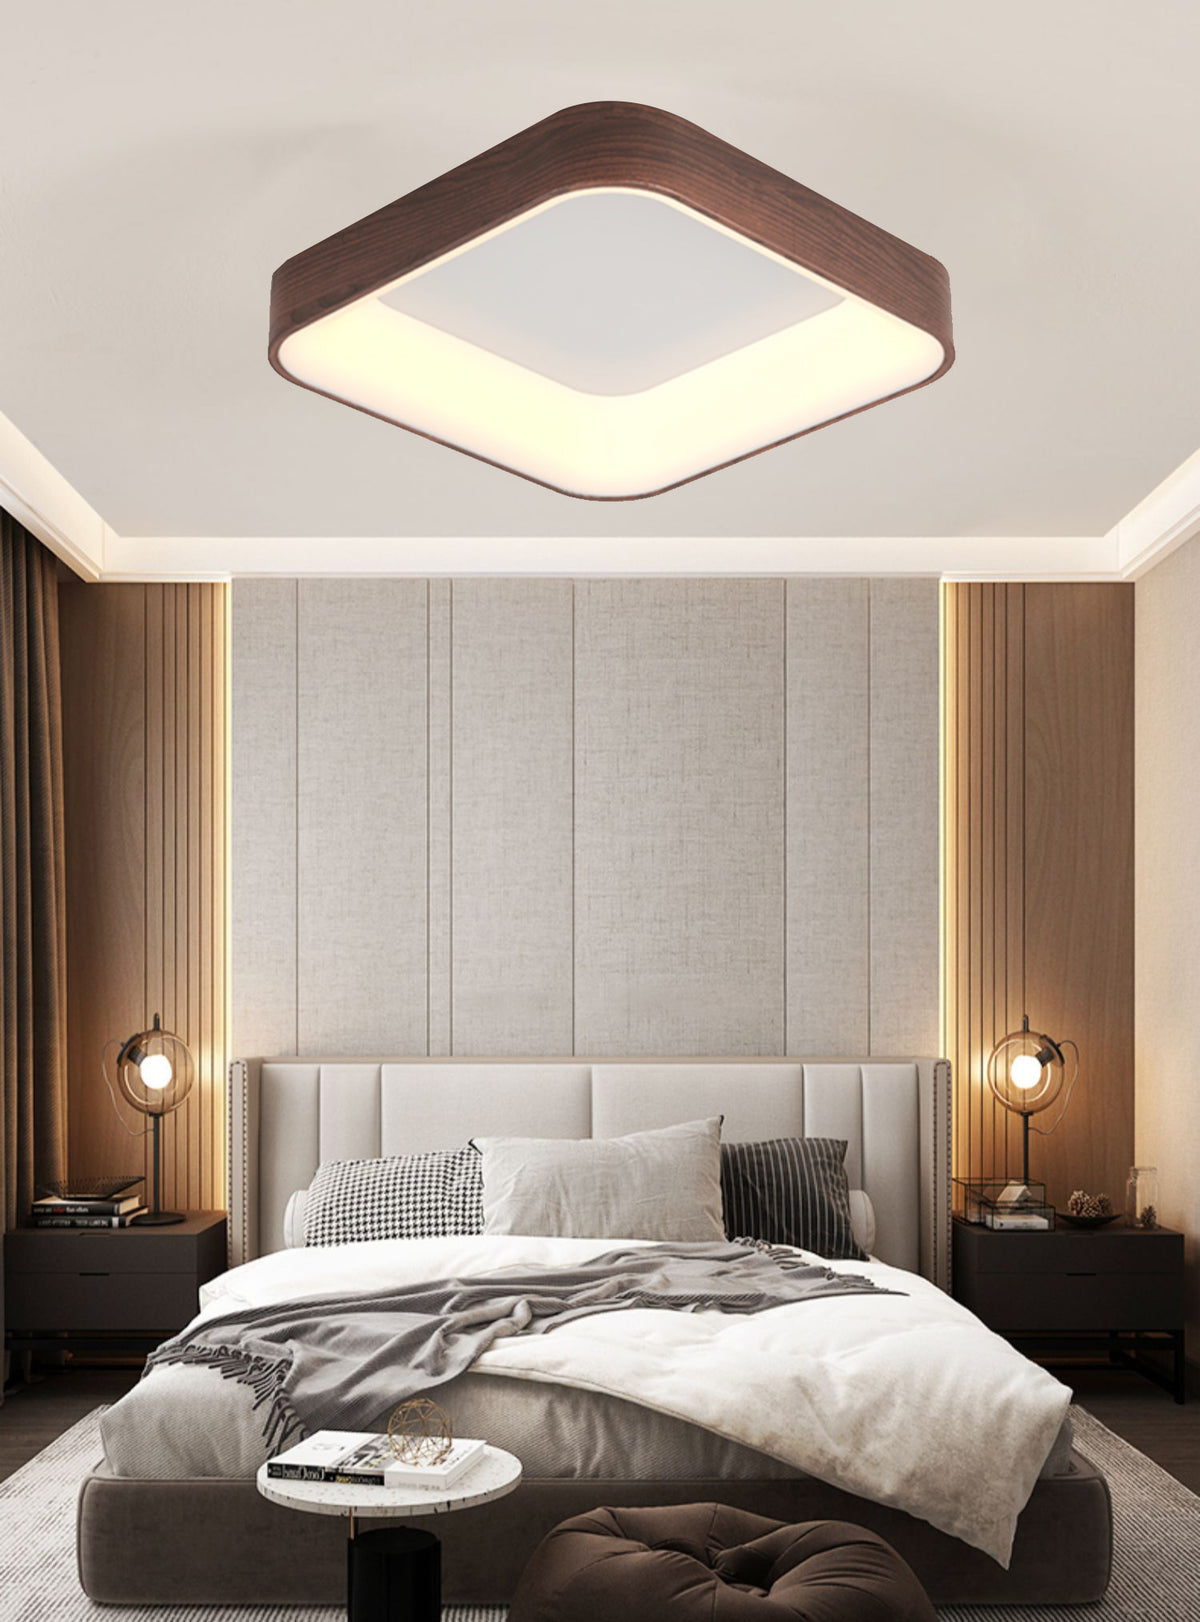 Wooden Square Ring LED Flush Mount Ceiling Light in Scandinavian Style in Cozy Bedroom